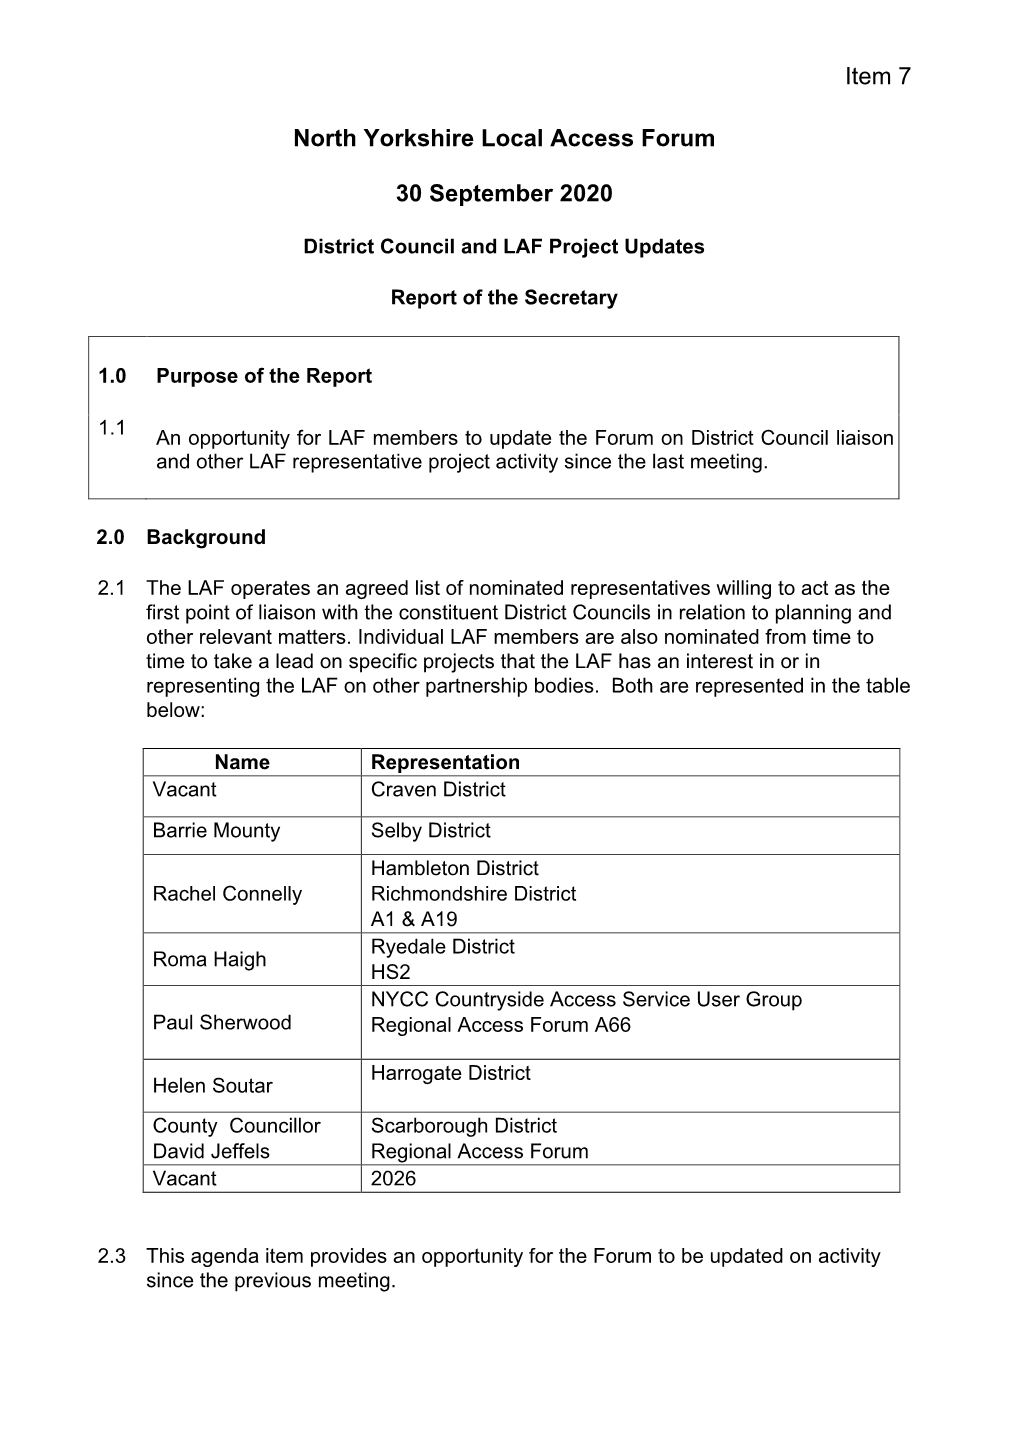 07 District Council and LAF Projects Update Report.Pdf